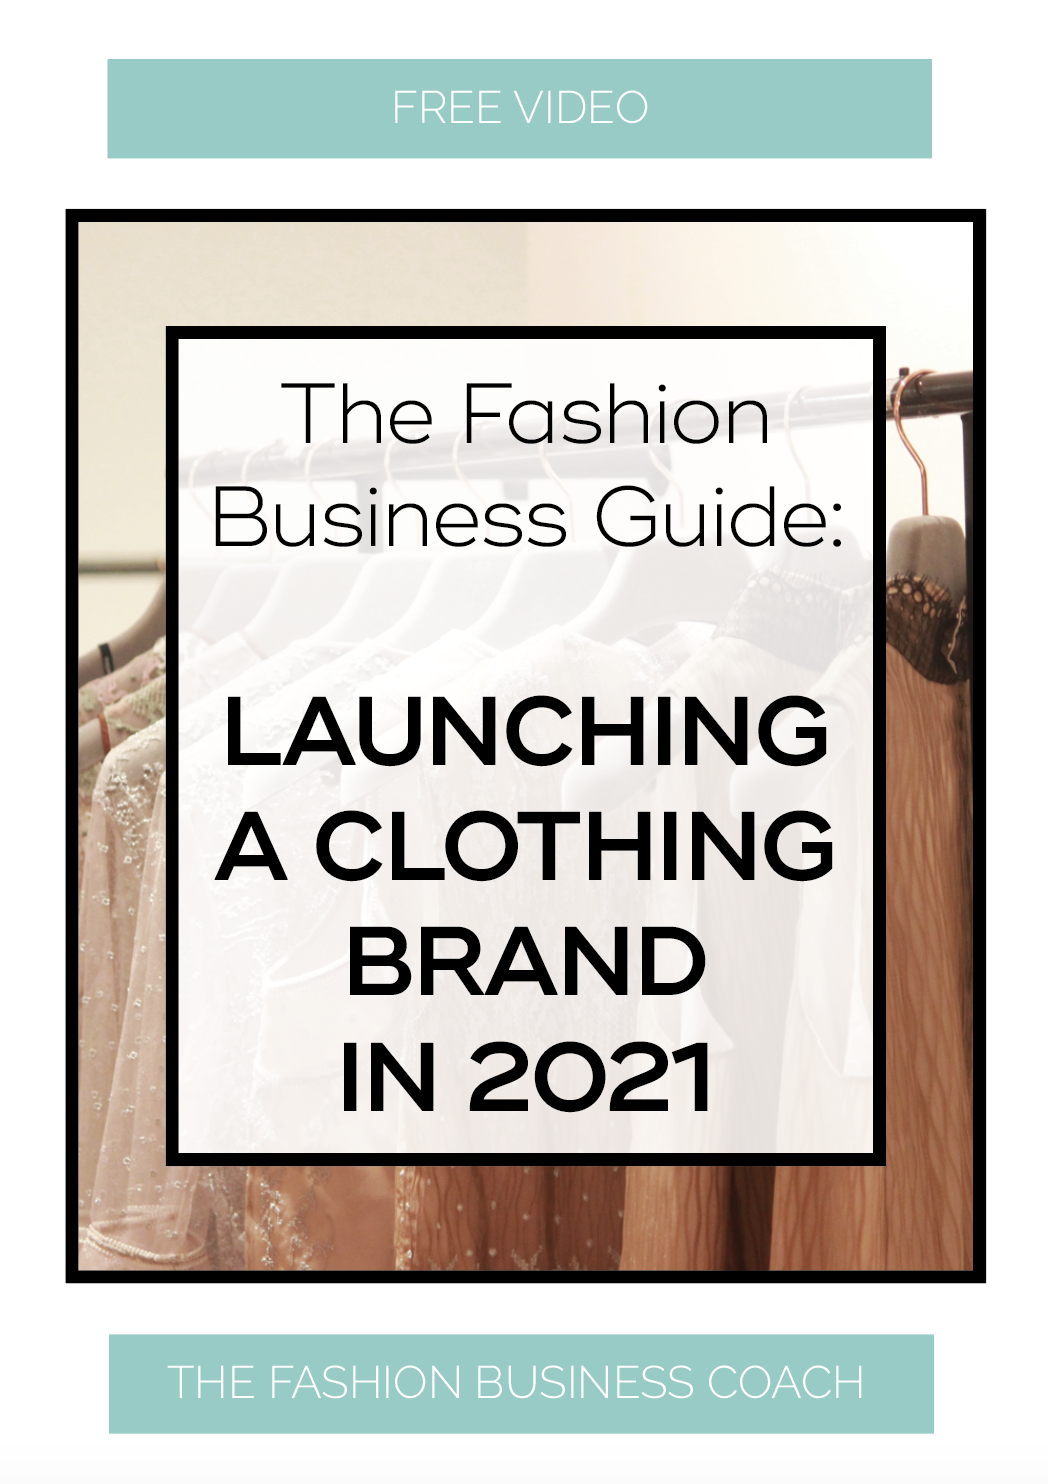 The Fashion Business Guide Launching a Clothing Brand in 2021 3.png